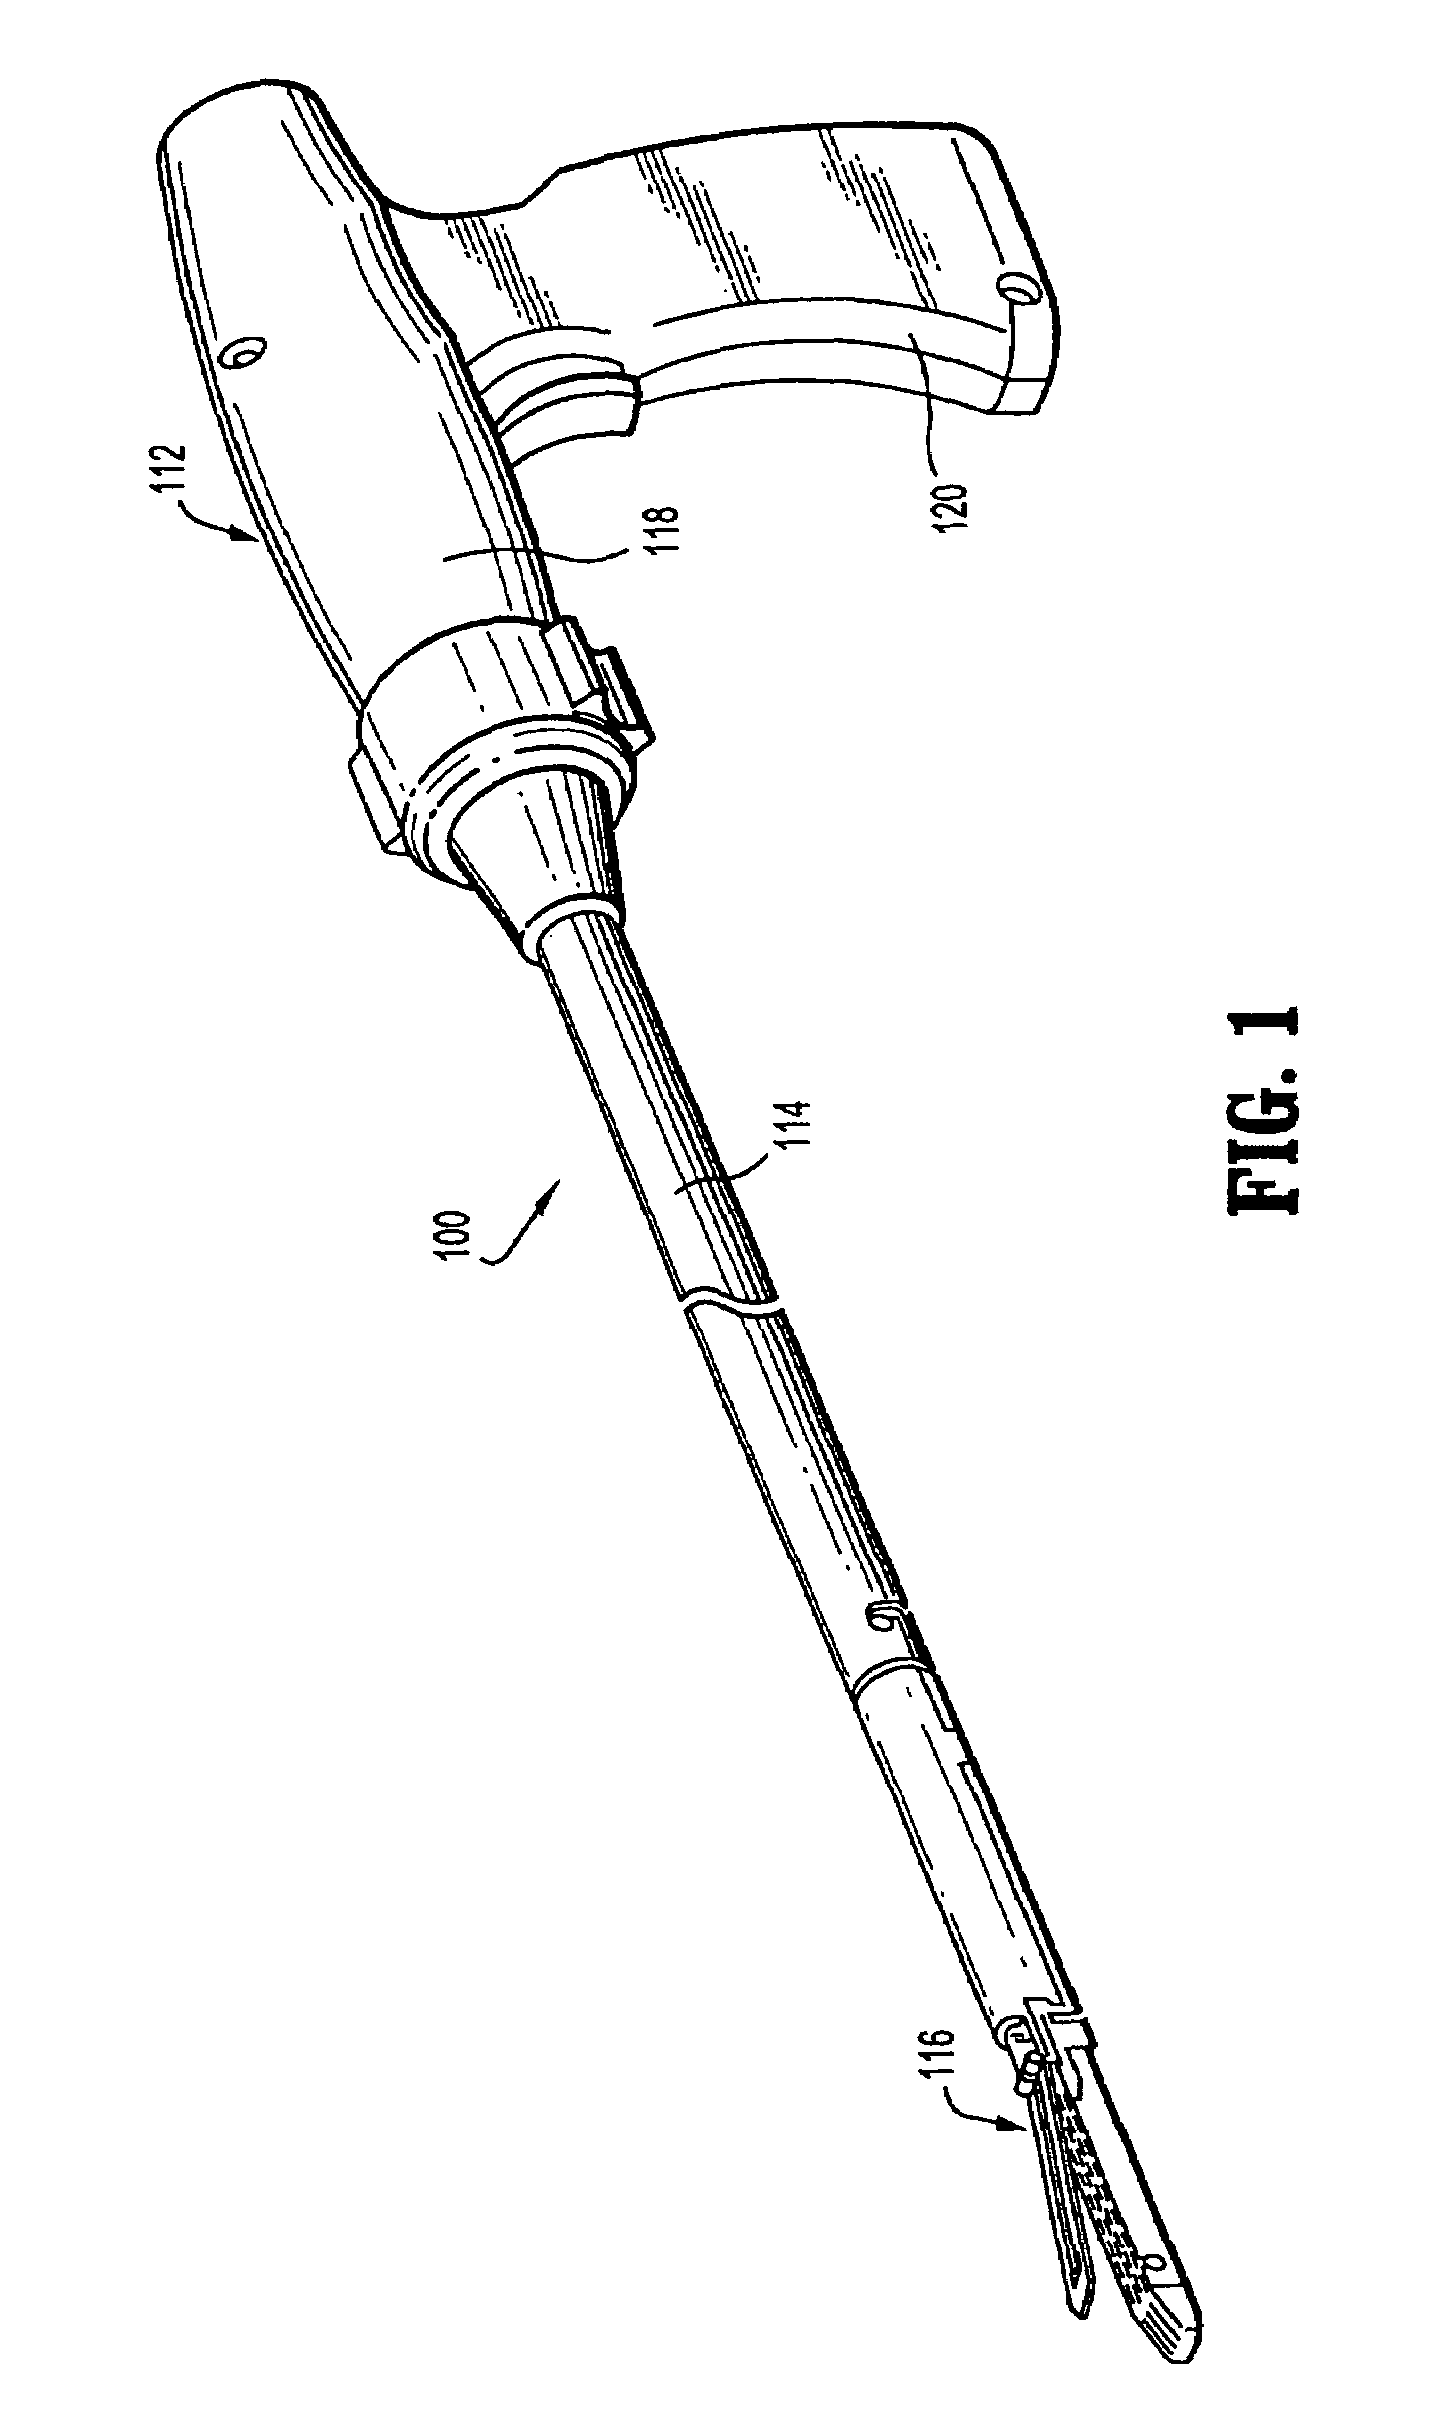 Surgical instrument with flexible drive mechanism